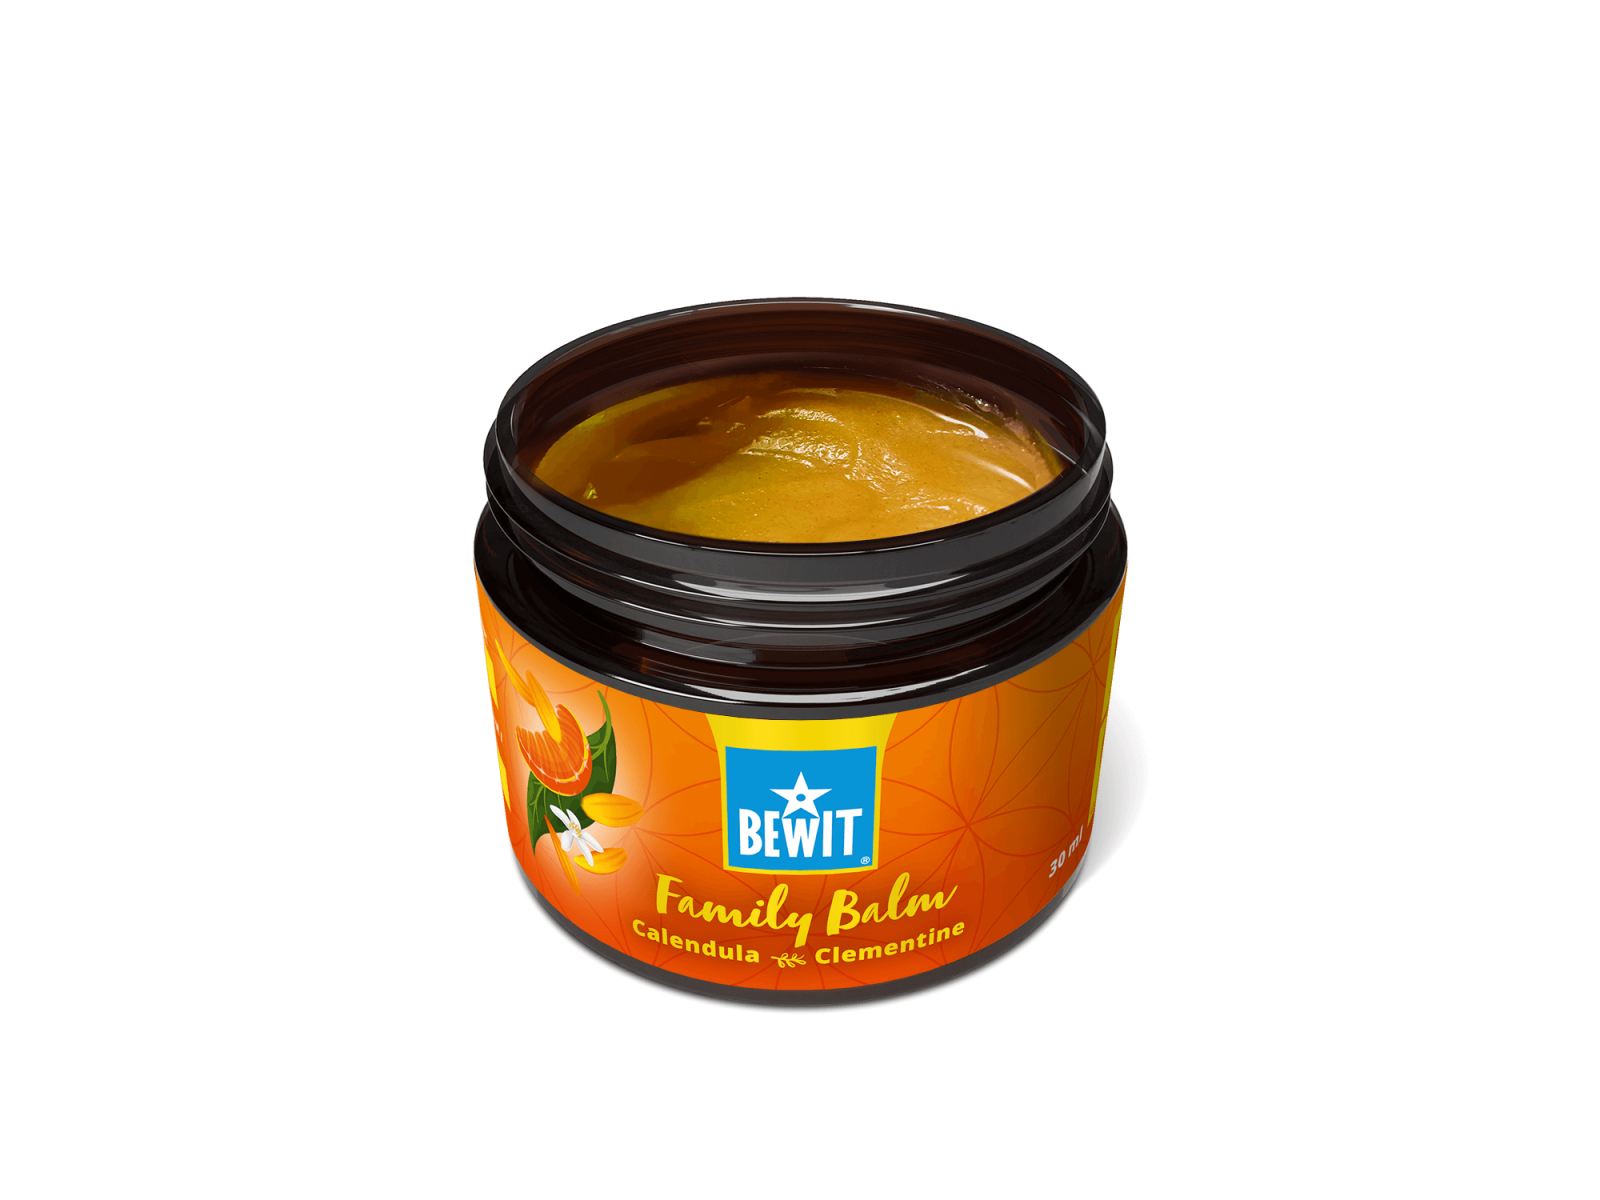 FAMILY BALM CALENDULA AND CLEMENTINE - CARING BALM FOR THE WHOLE FAMILY - 6